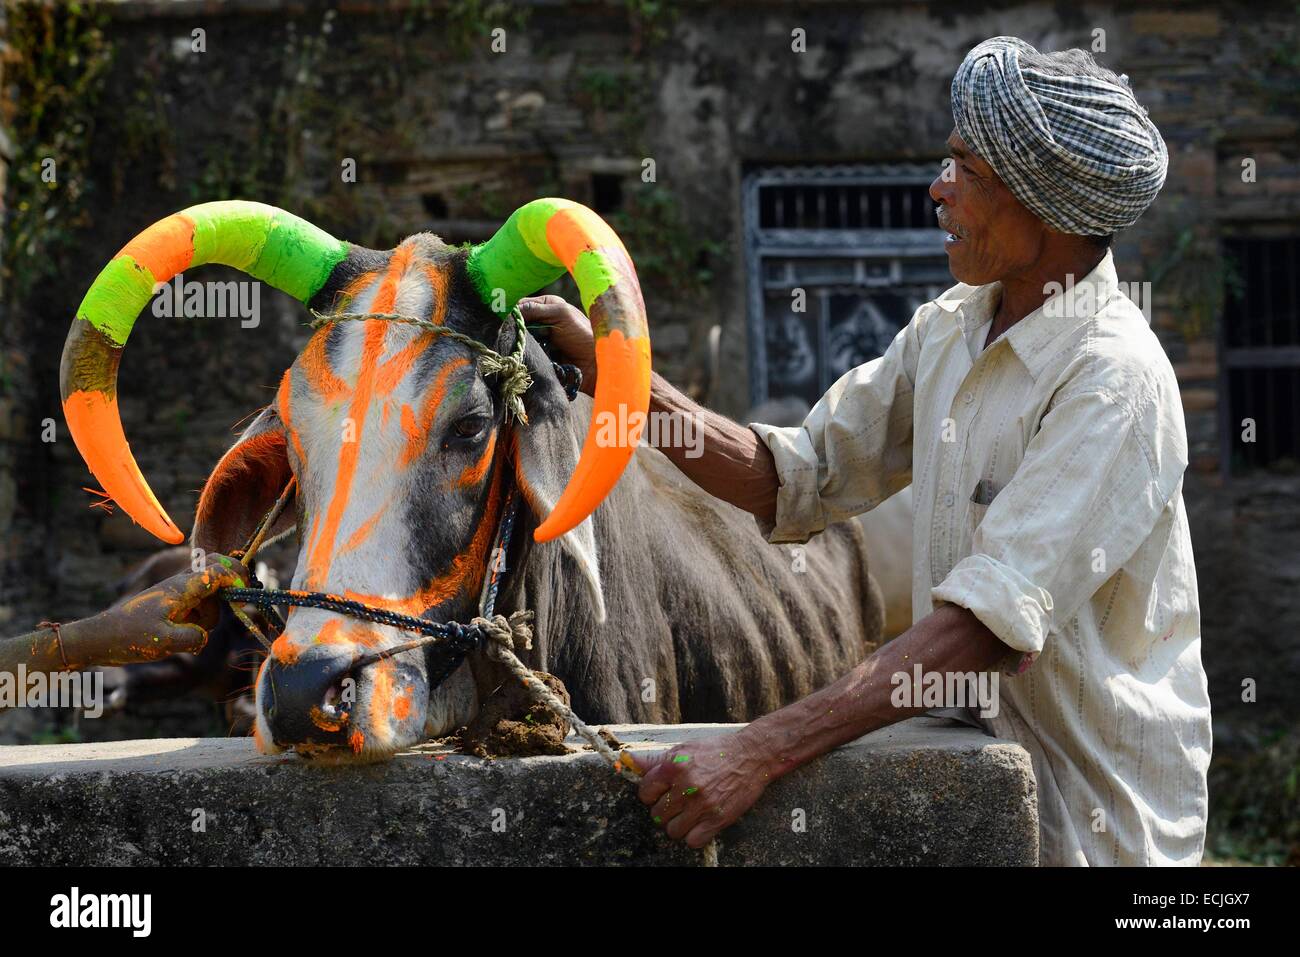 India, Rajasthan, Udaipur region, Diwali festival, Farmers painting the horns of a holy cow The fourth day of Diwali festival is marked by cow worship. Cows are often elaborately decorated or painted on the occasion. Stock Photo